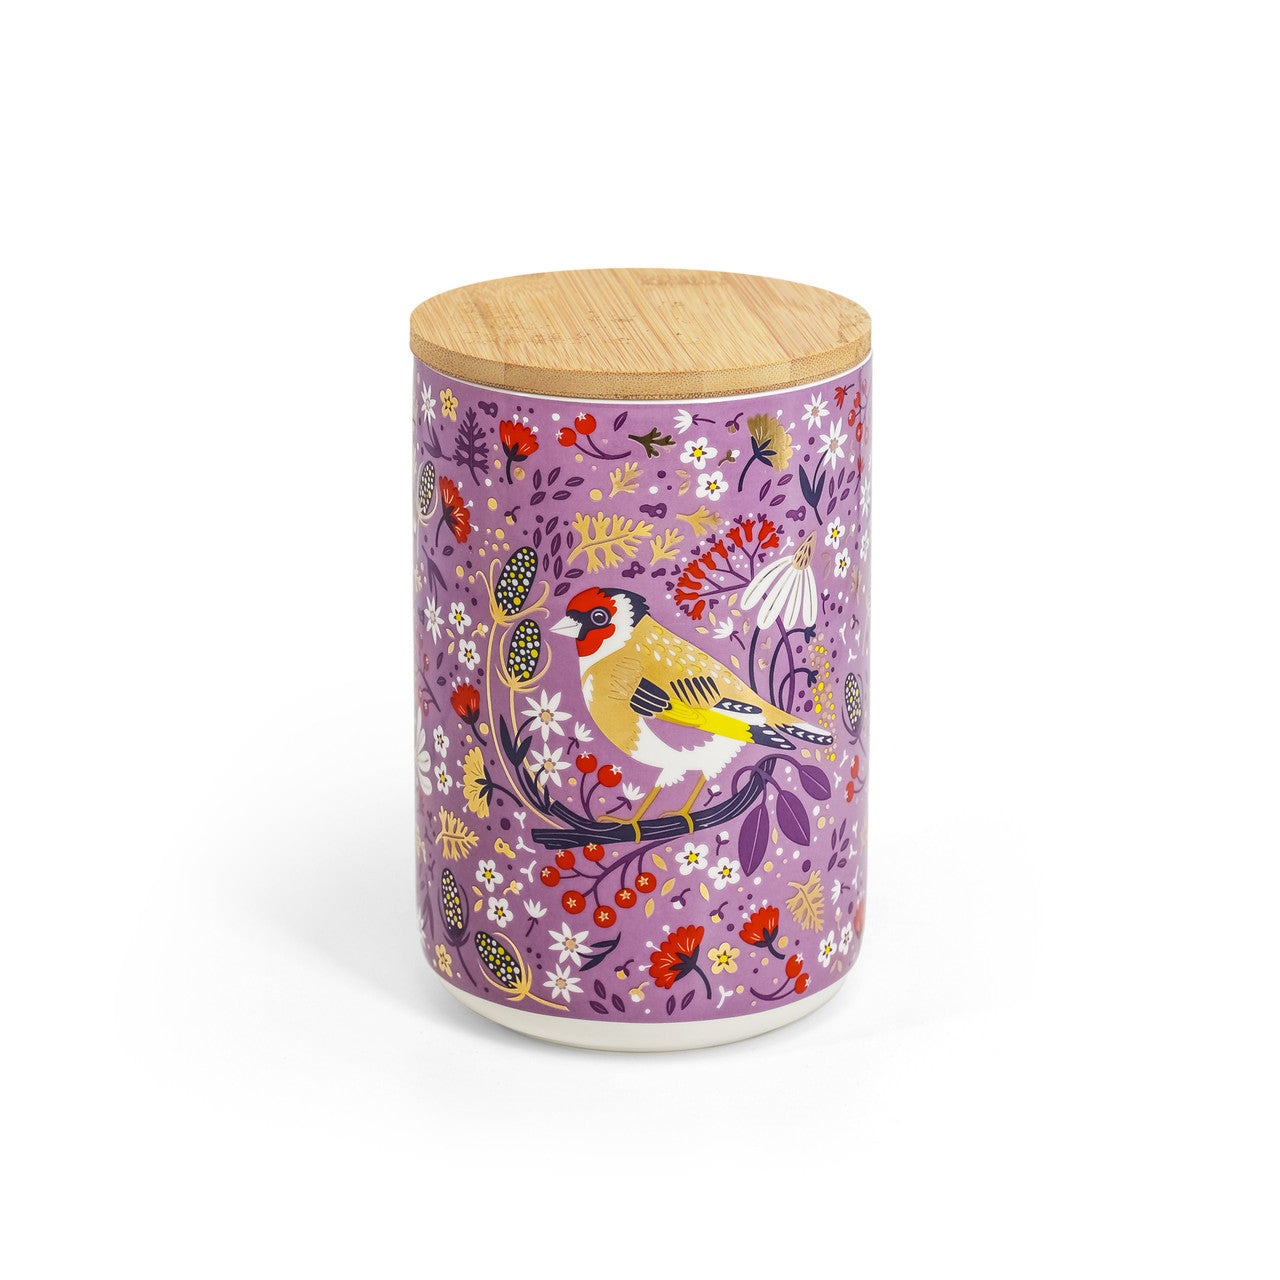 Tipperary Crystal Birdy Storage Jar - Goldfinch - New 2022  New to our collection, this birdy storage jar come beautifully illustrated and presented in a rigid Tipperary Crystal gift box. Makes a wonderful gift to be enjoyed.  The Birdy Collection is a series of 6 exclusively commissioned illustrations inspired by native Irish birds; Bullfinch, Goldfinch, Blue tit, Greenfinch, Kingfisher and Robin.